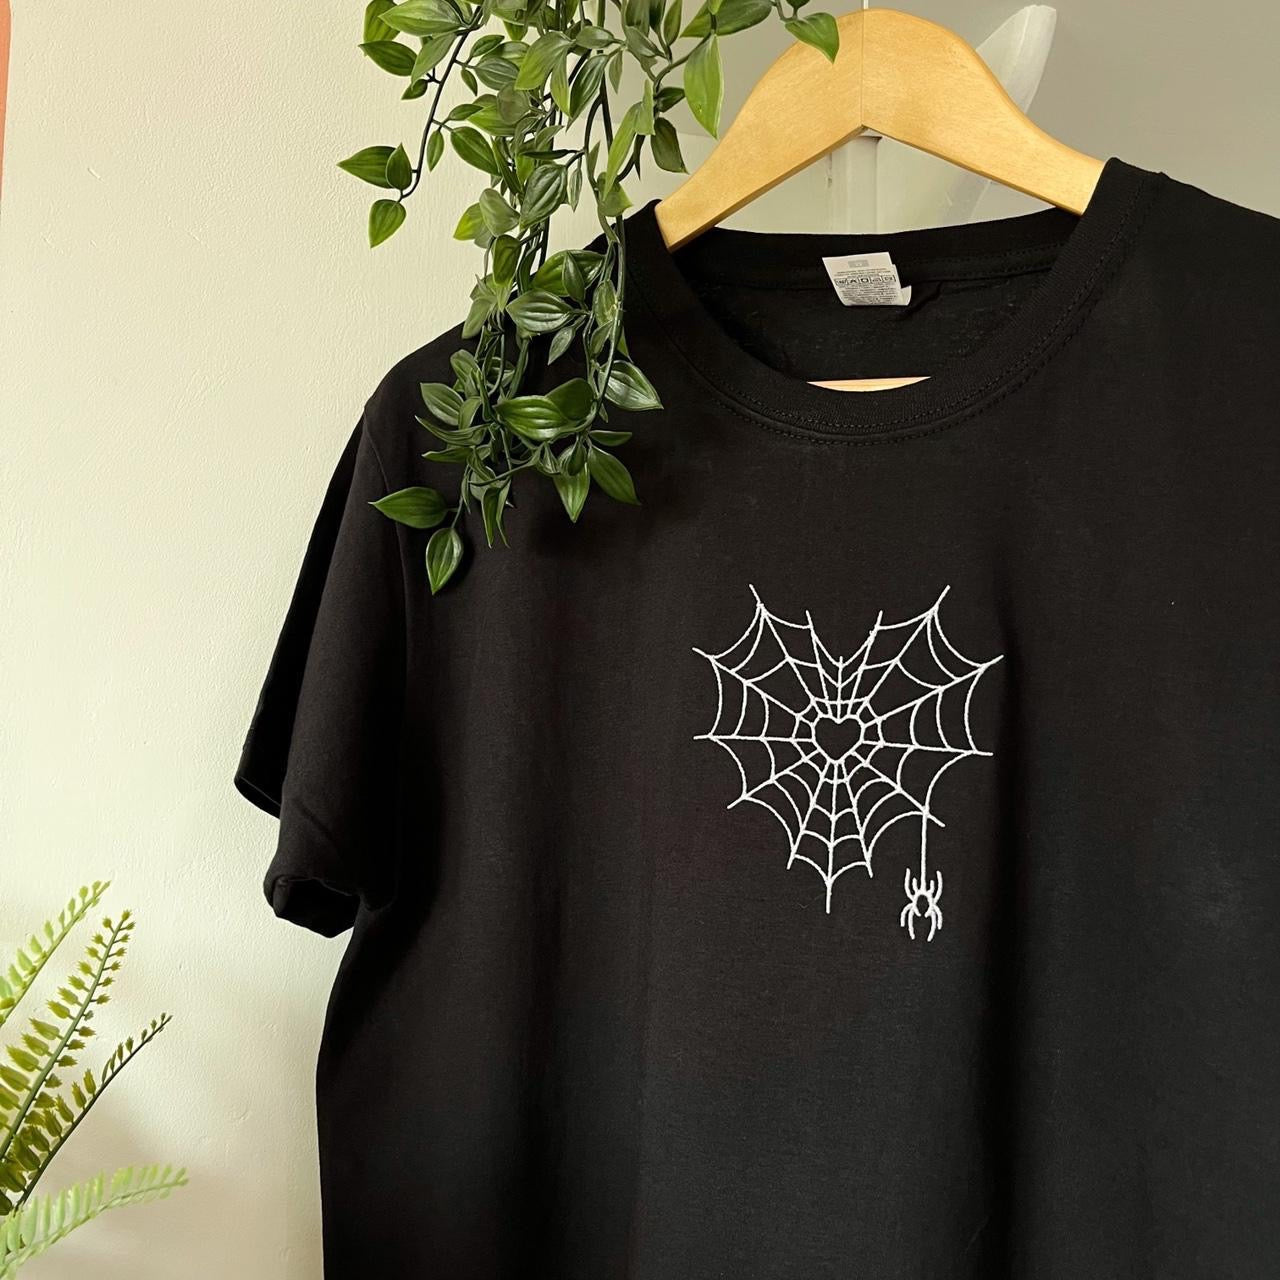 Spider Web Heart Tattoo Style Embroidered T-shirt